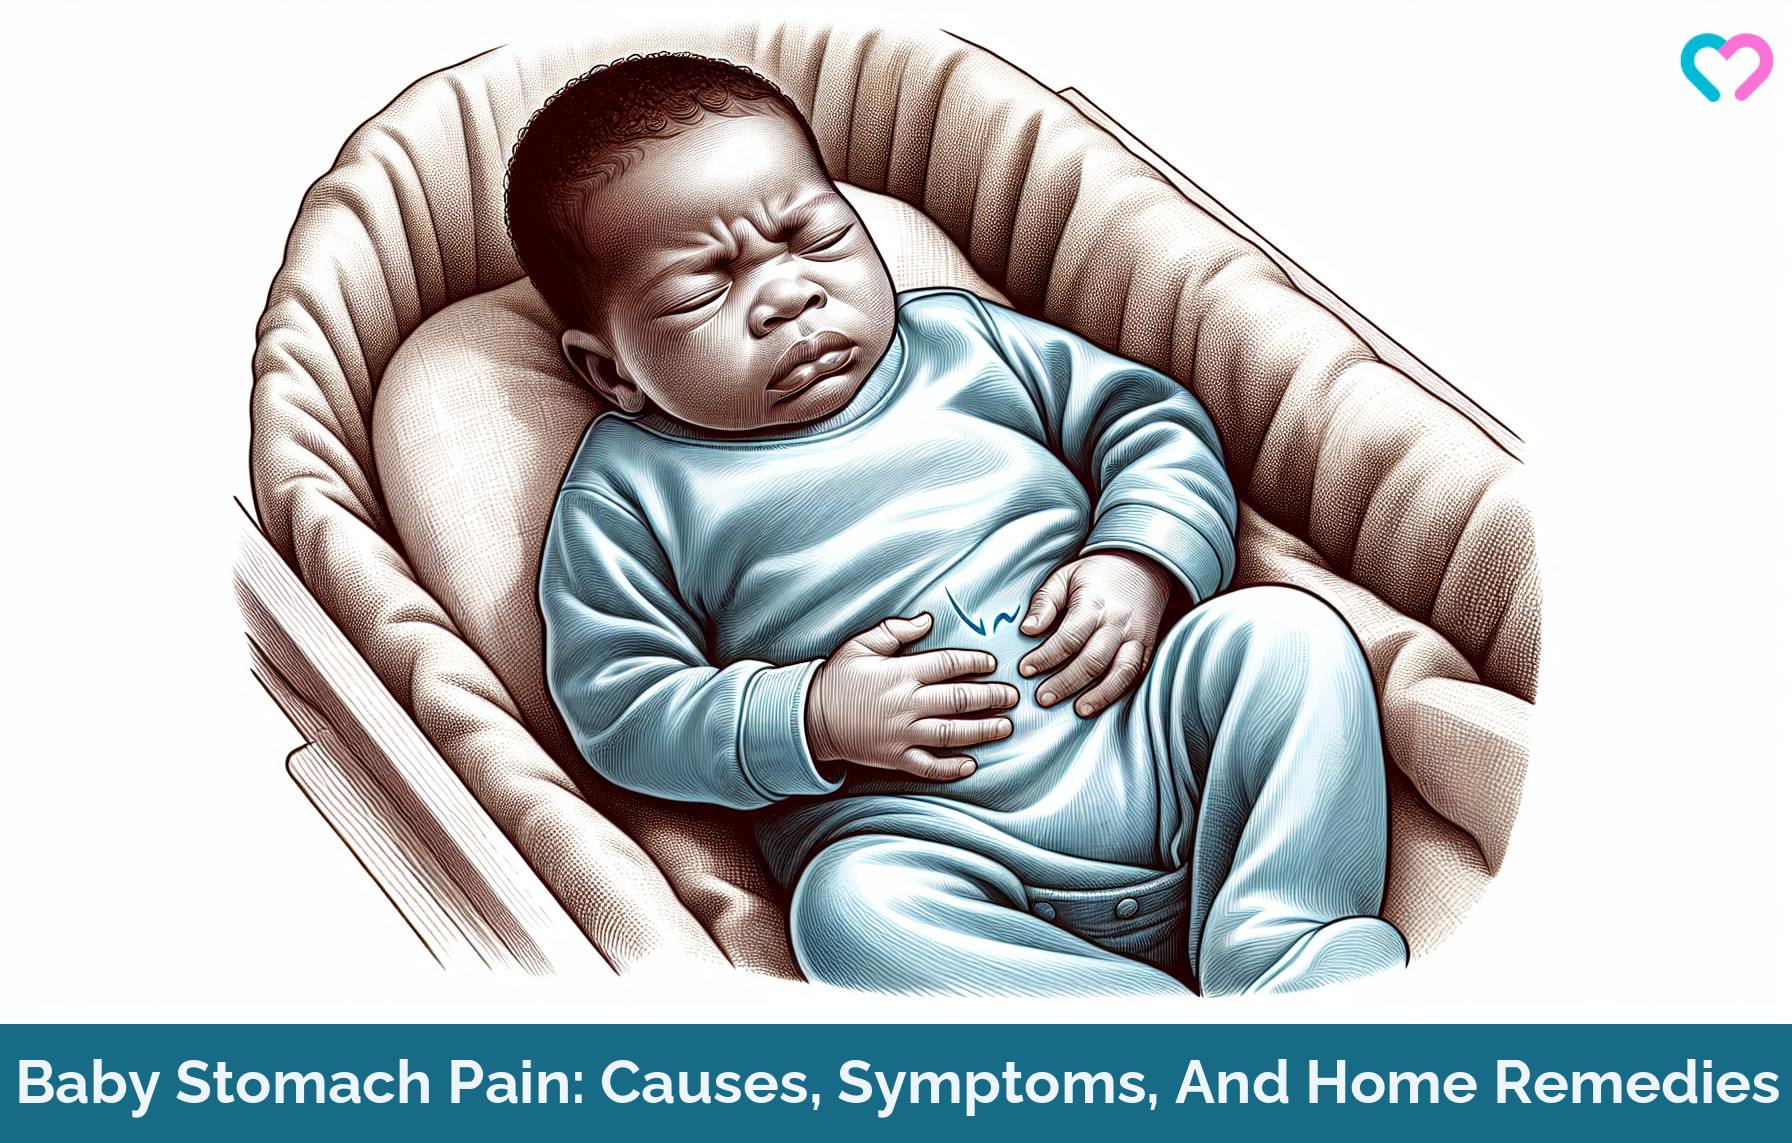 Baby Stomach Pain_illustration